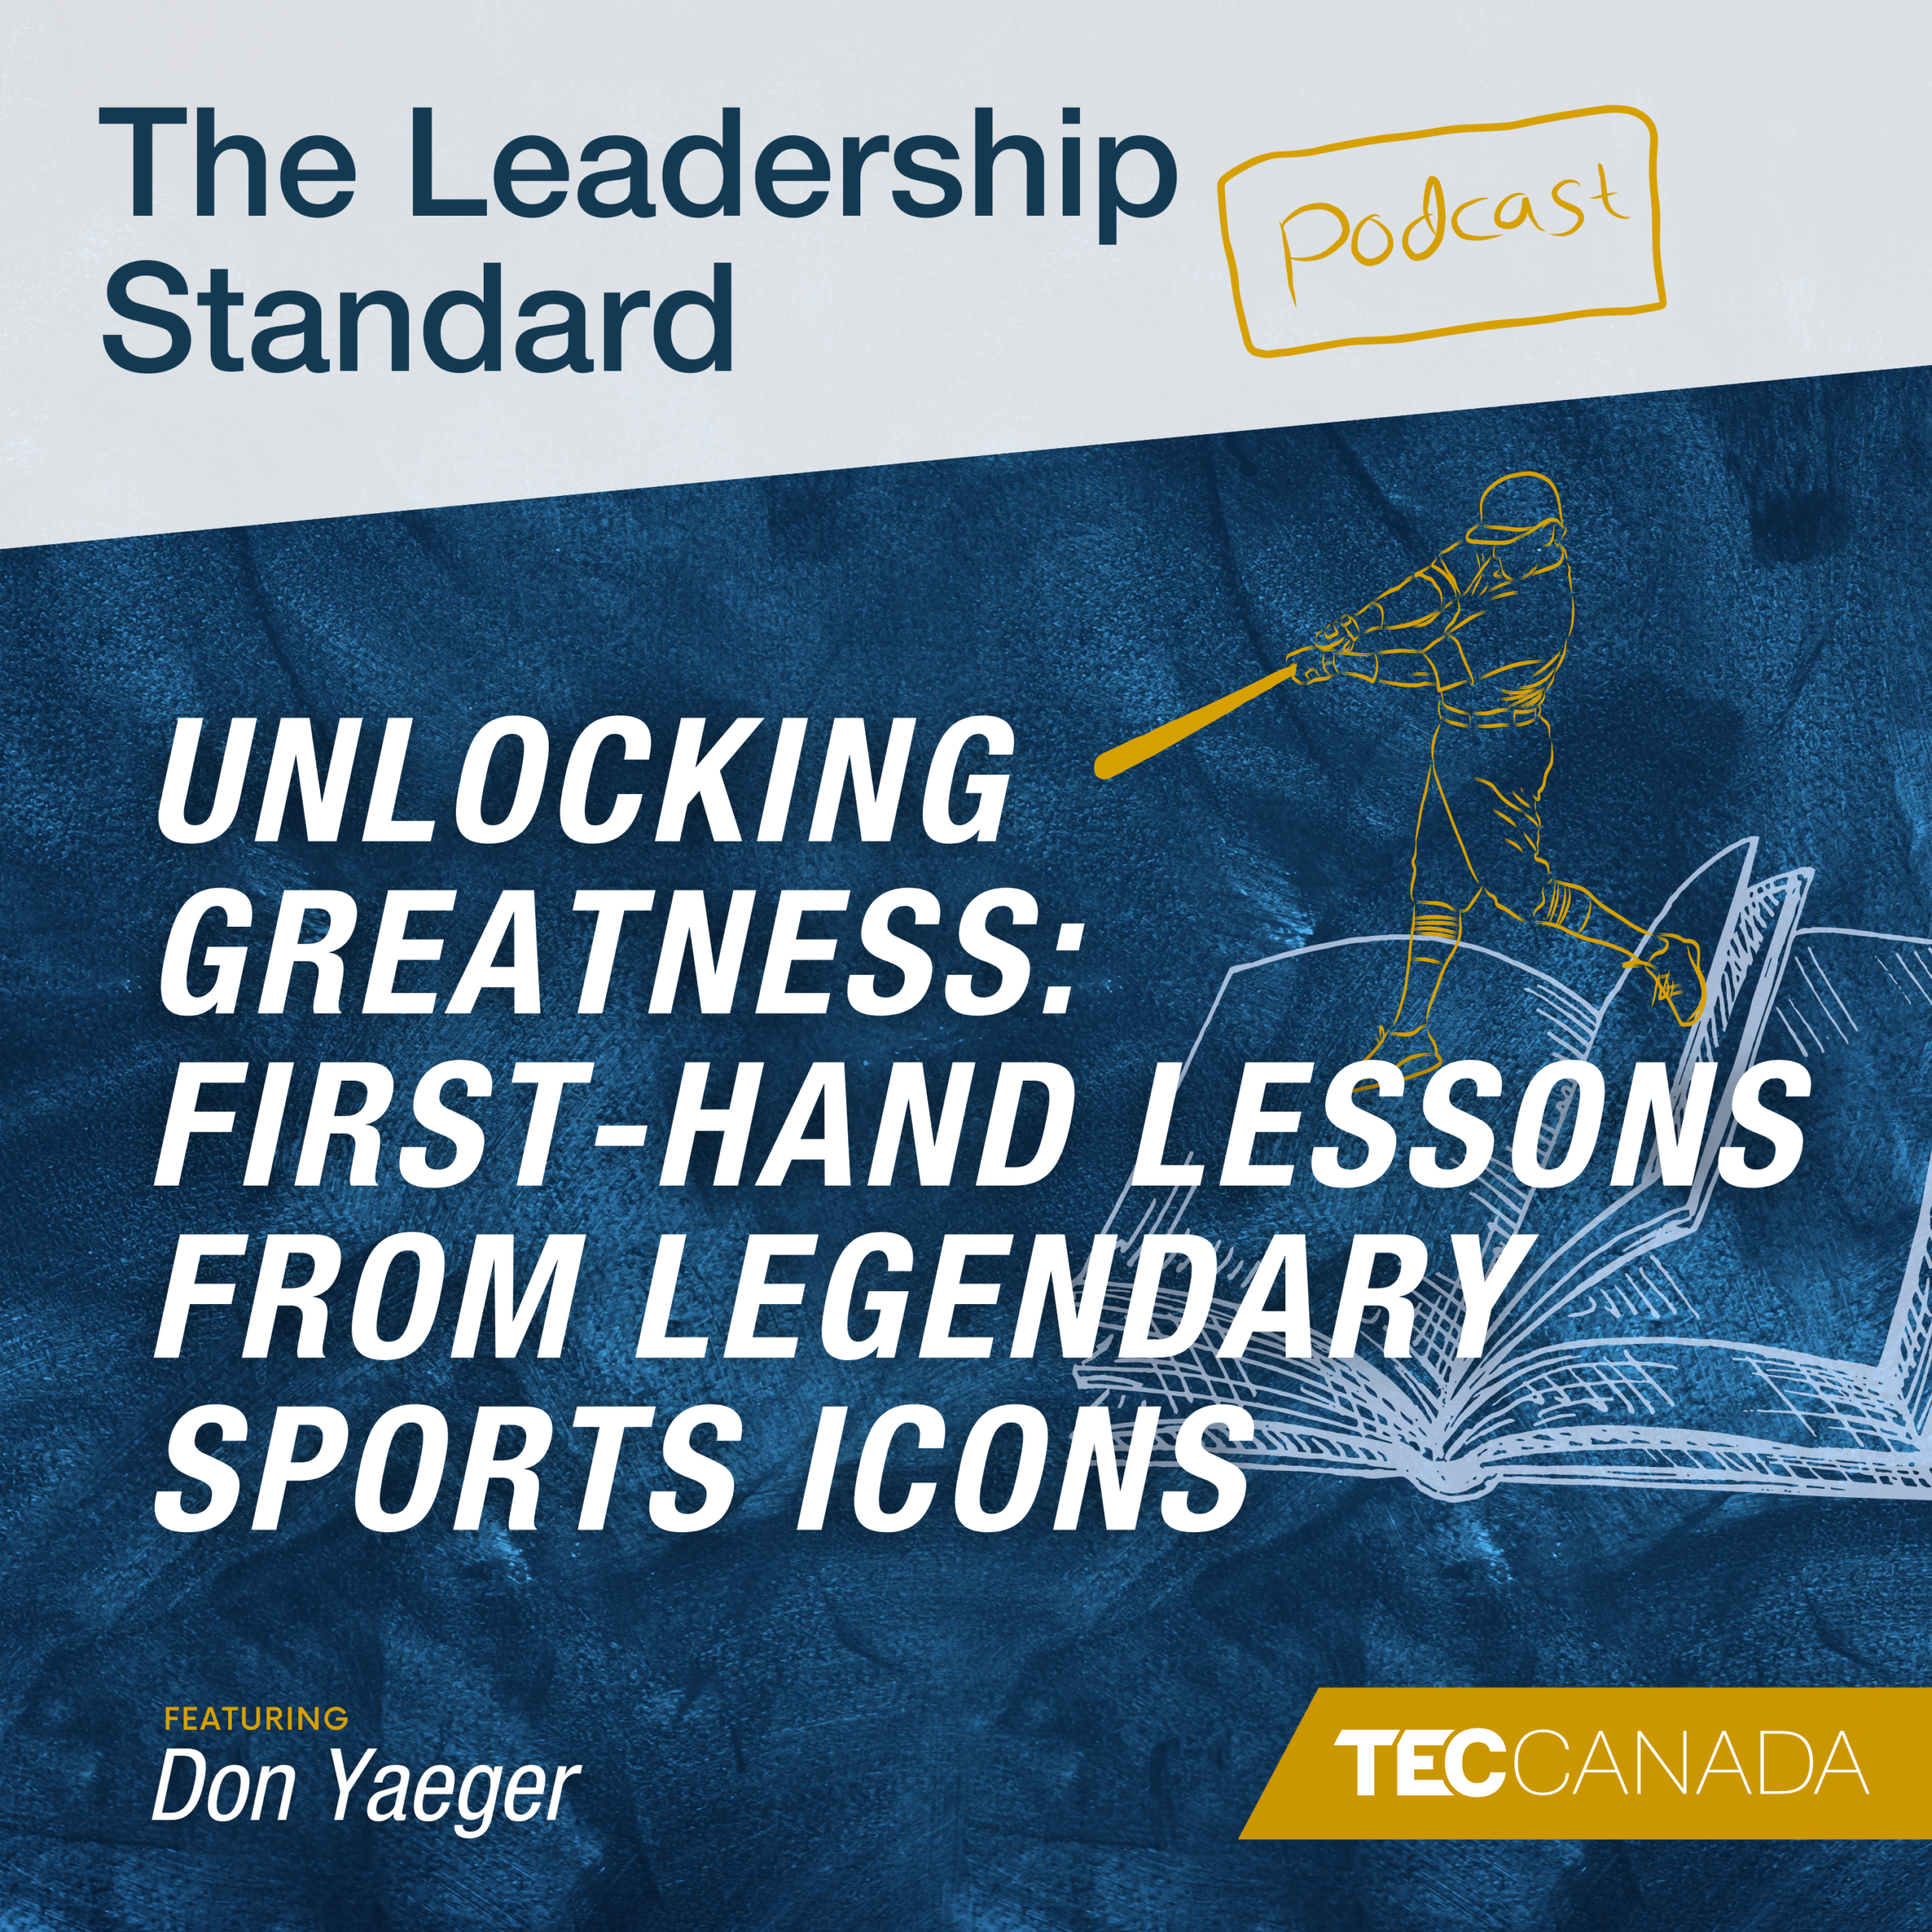 In this episode, host Jamie Mason Cohen welcomes Don Yaeger an acclaimed keynote speaker and corporate storyteller, to The Leadership Standard Podcast. Don's own podcast, Corporate Competitor Podcast earned recognition among America's top 50 podcasts in 2020